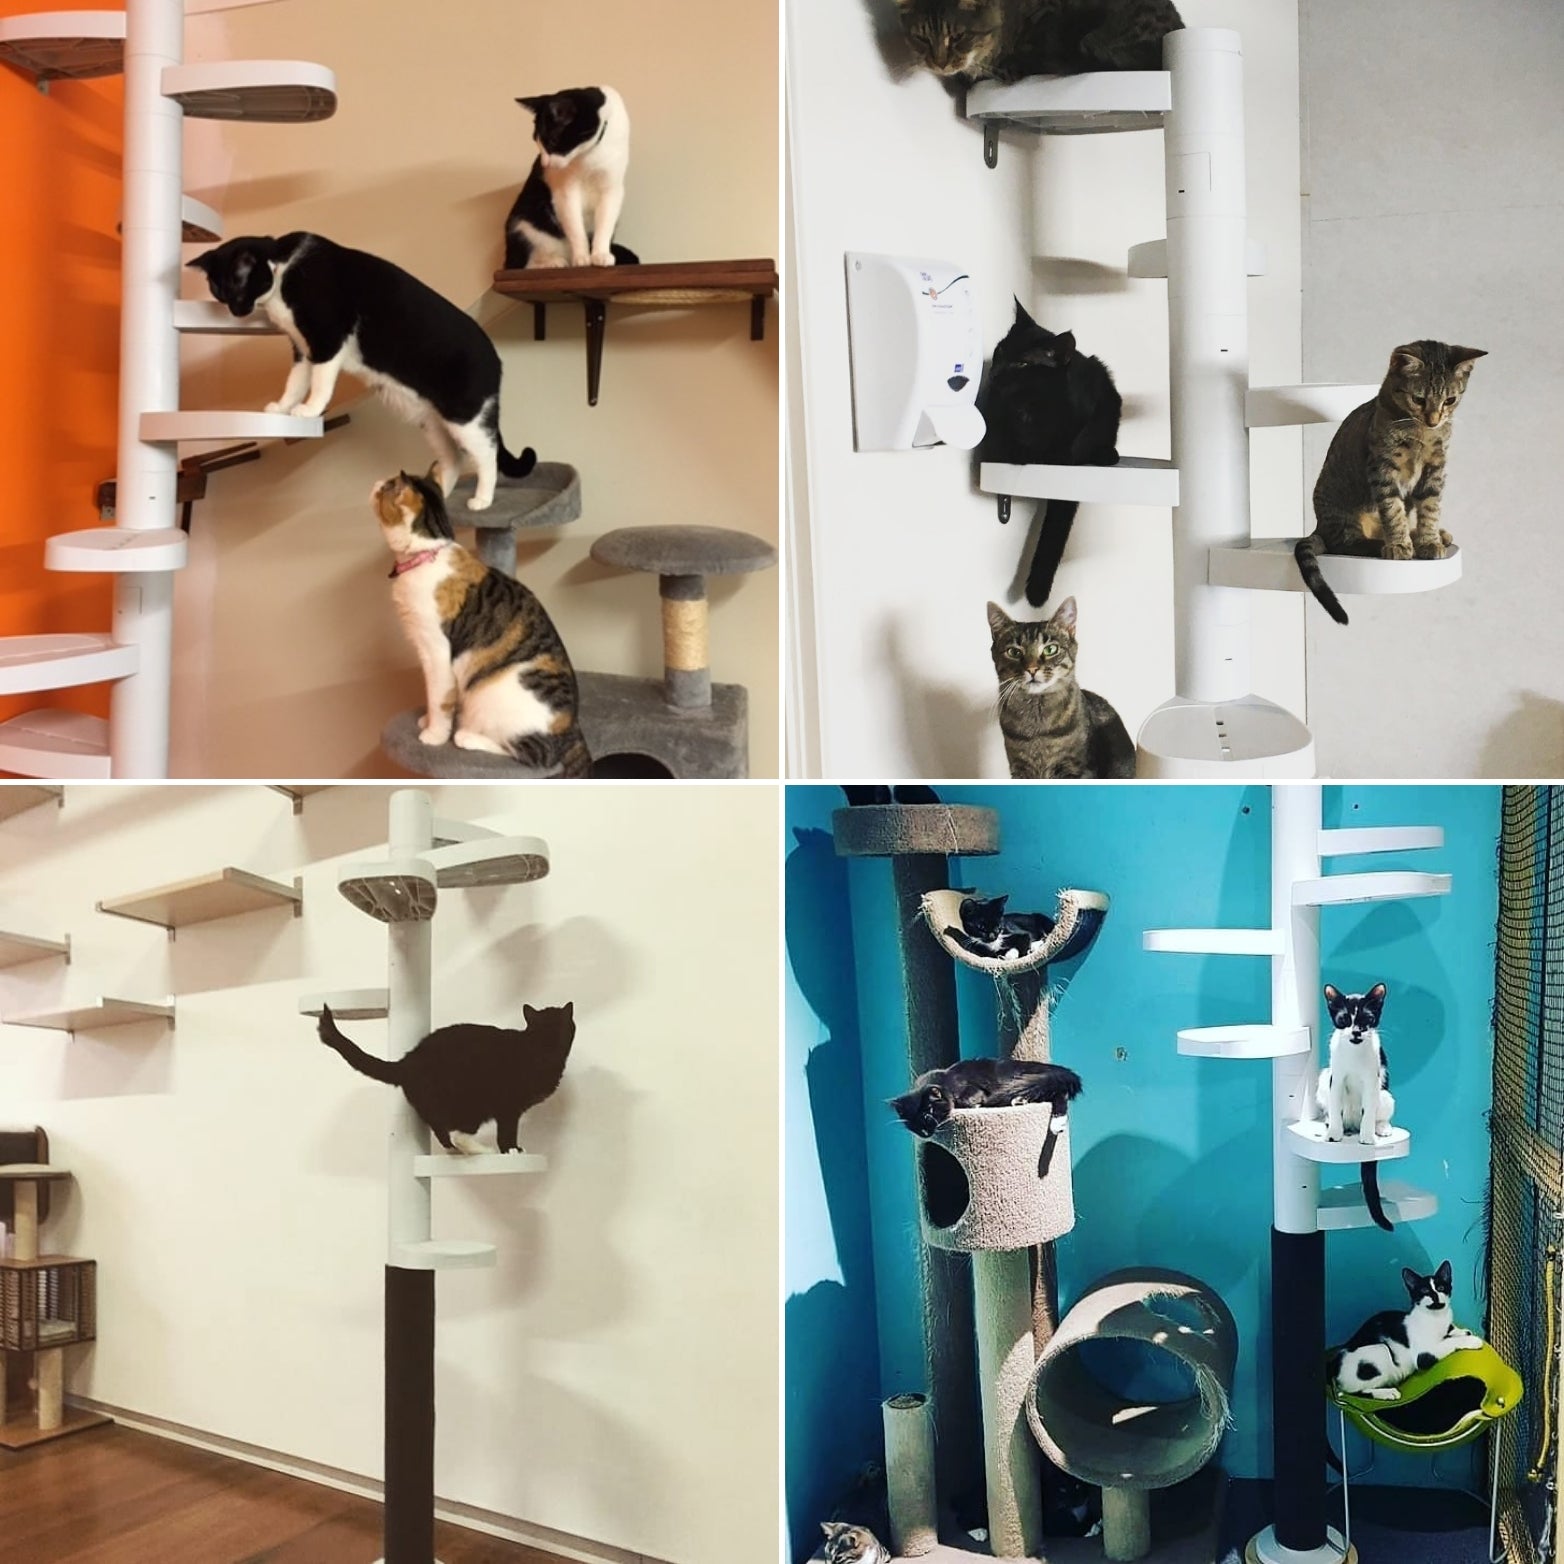 Monkee Tree's are now in 6 Cat Cafes across Australasia